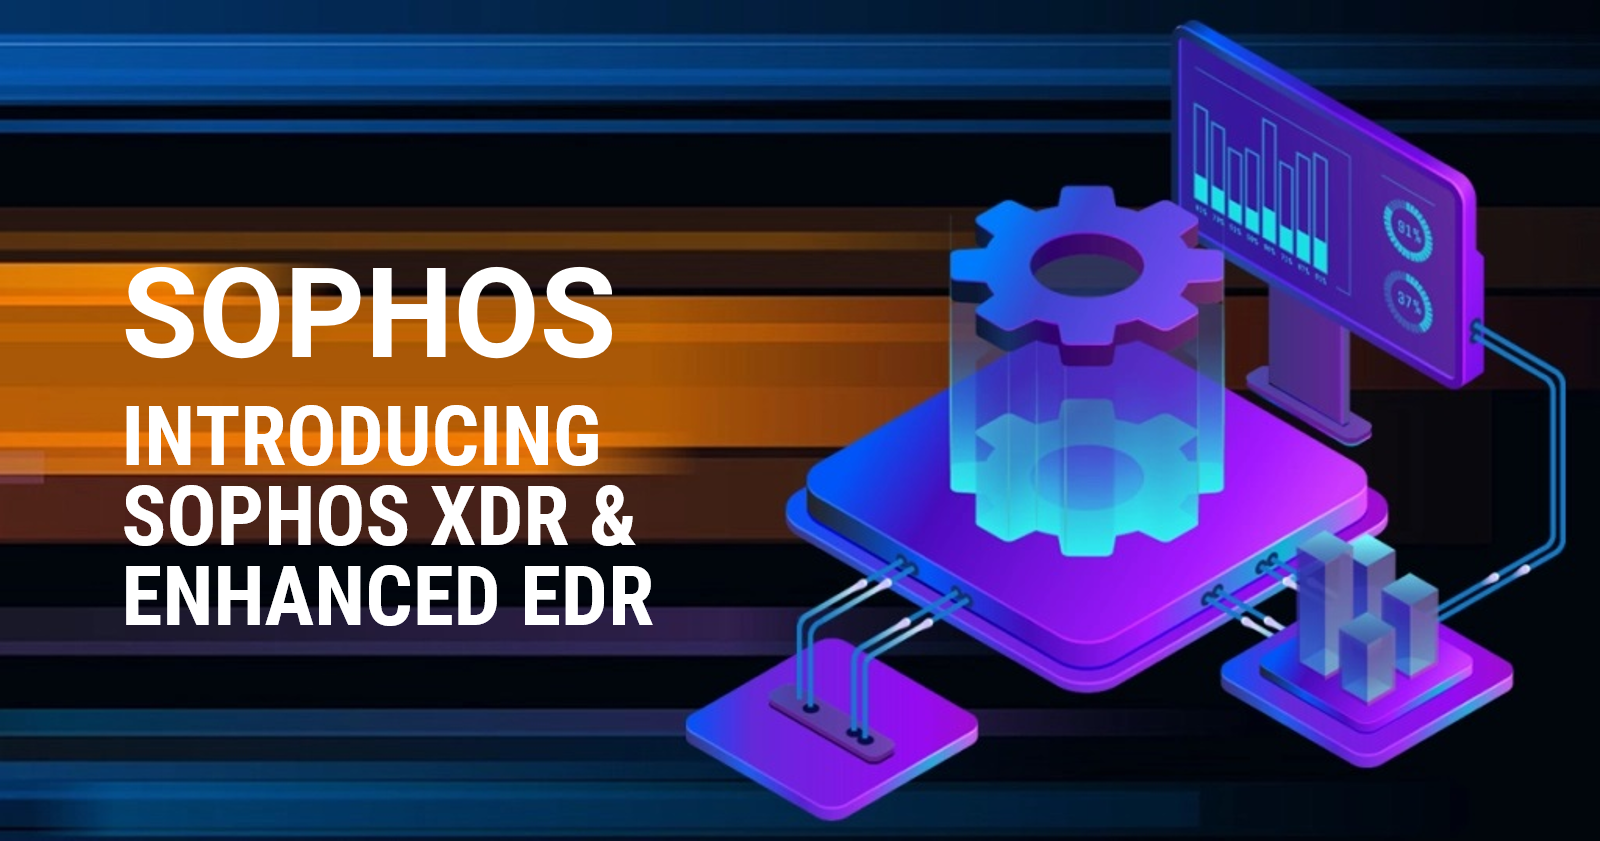 Sophos Introducing Sophos Xdr And Enhanced Edr Nss 4716